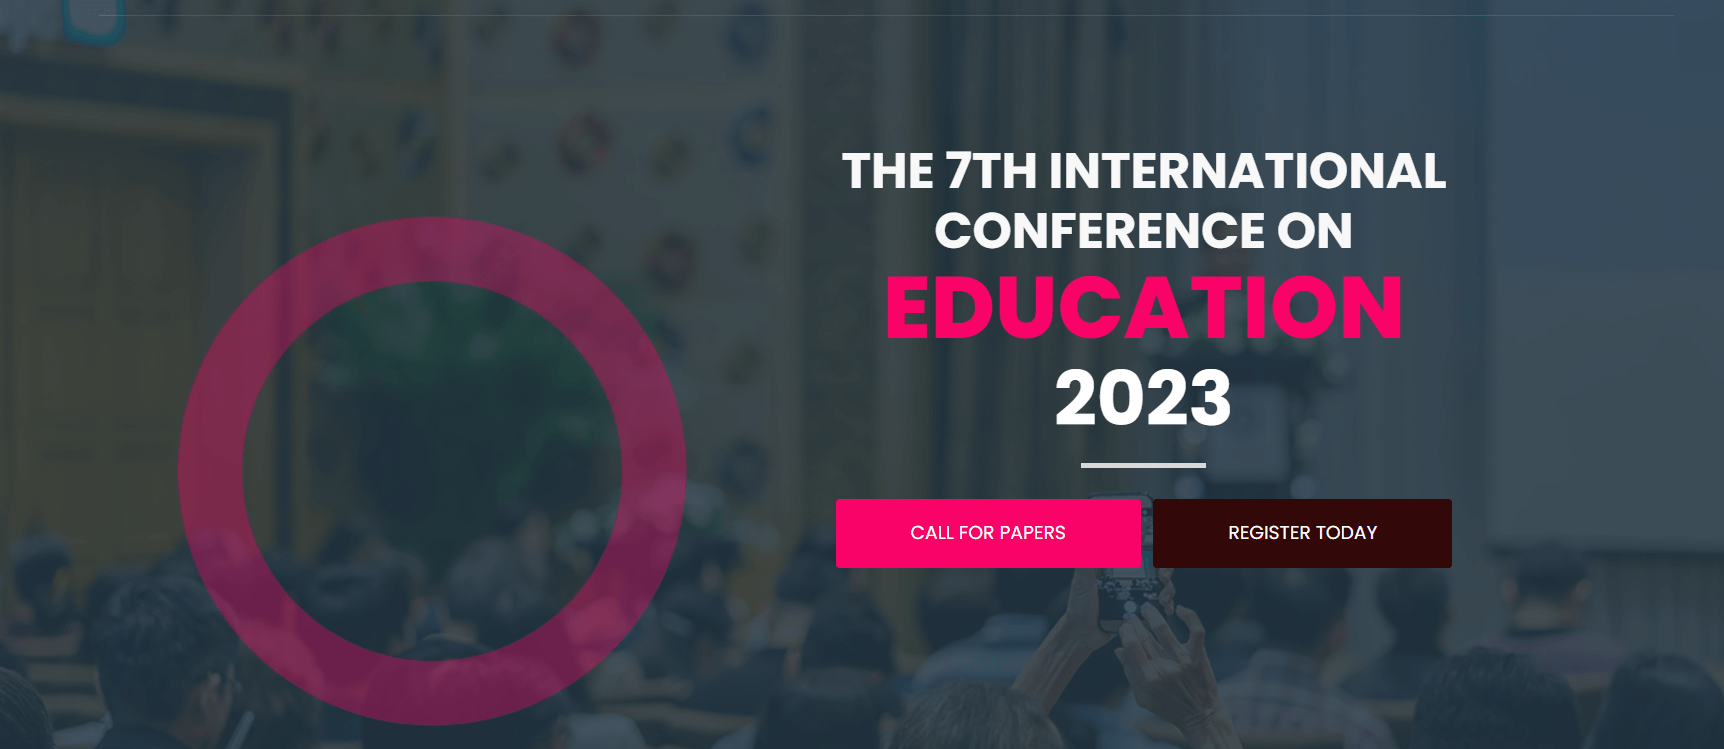 Home The 9th International Conference on Education 2023